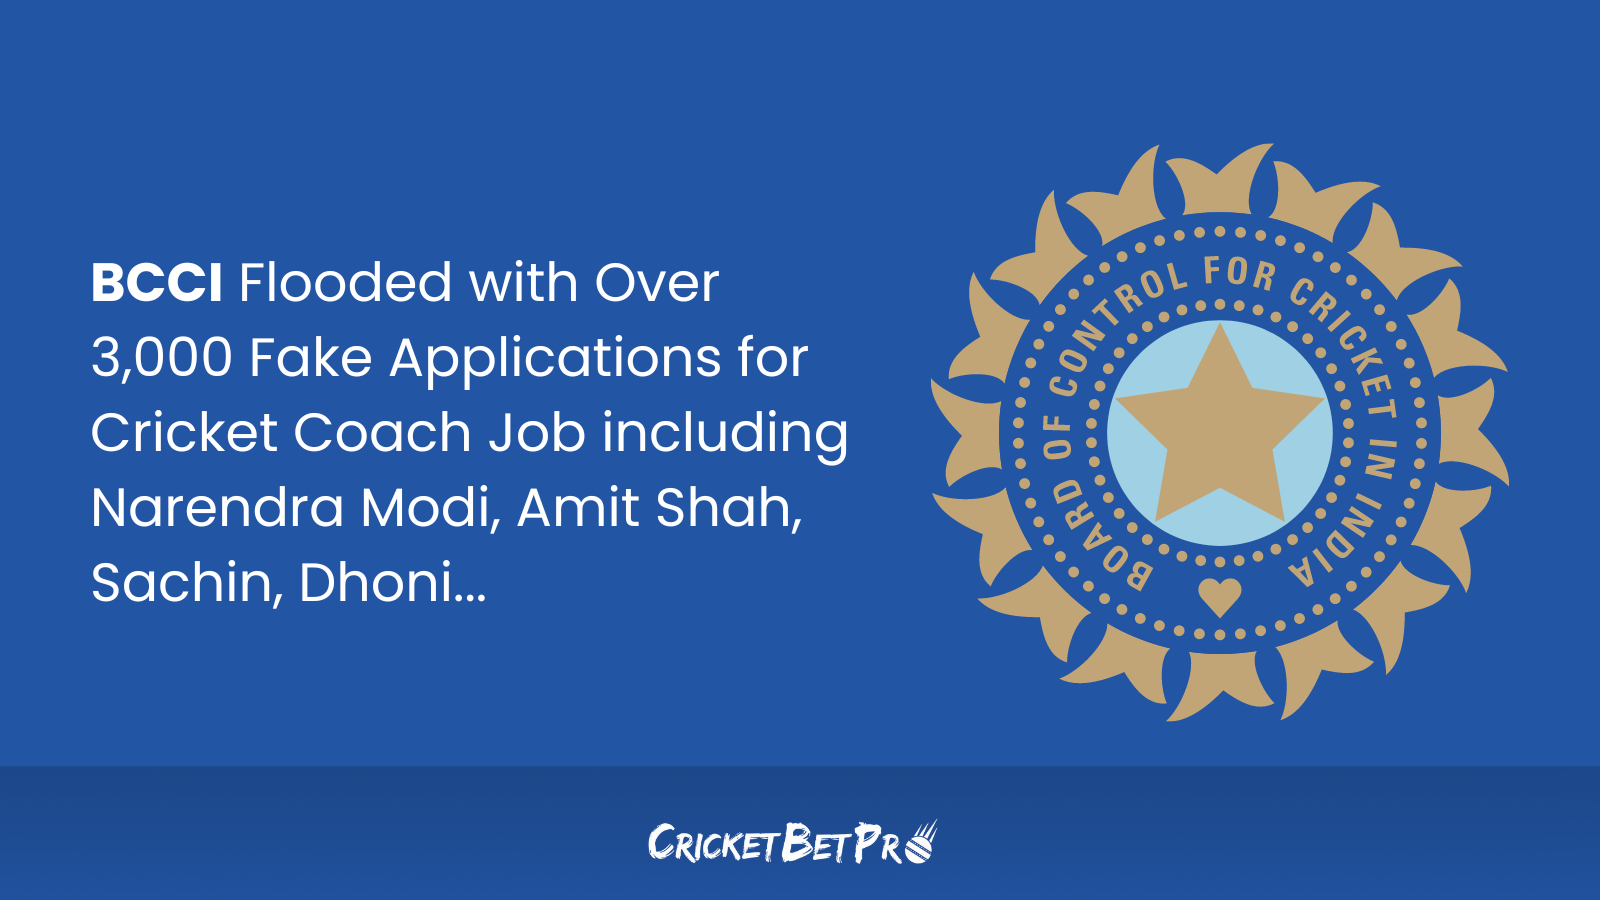 BCCI Flooded with Over 3,000 Fake Applications for Cricket Coach Job